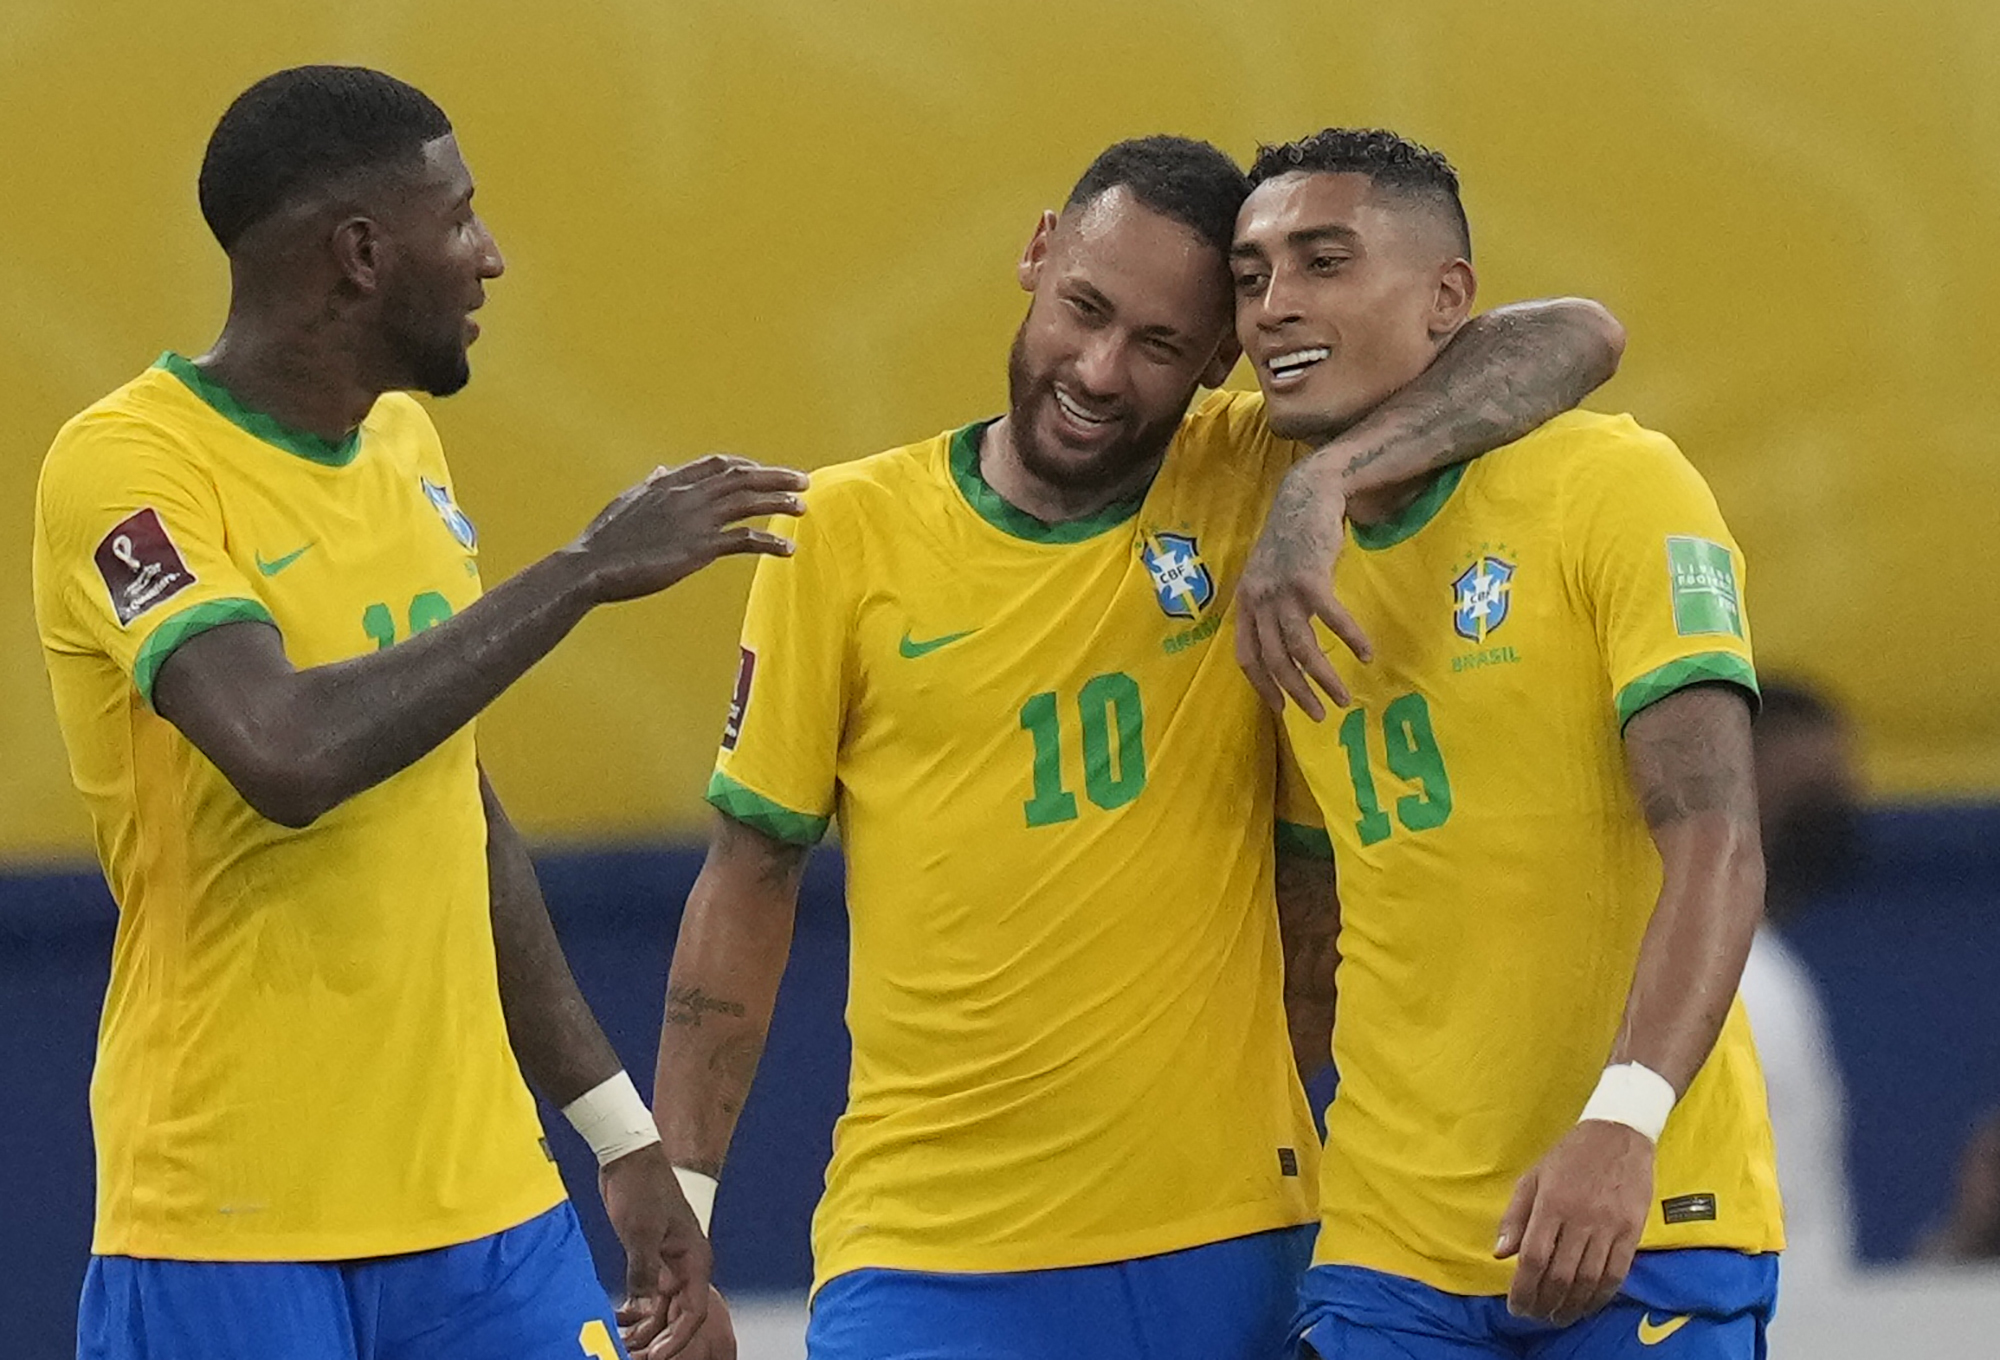 Brazil vs Serbia FREE LIVE STREAM (11/24/22) Watch World Cup 2022 online Time, USA TV, channel